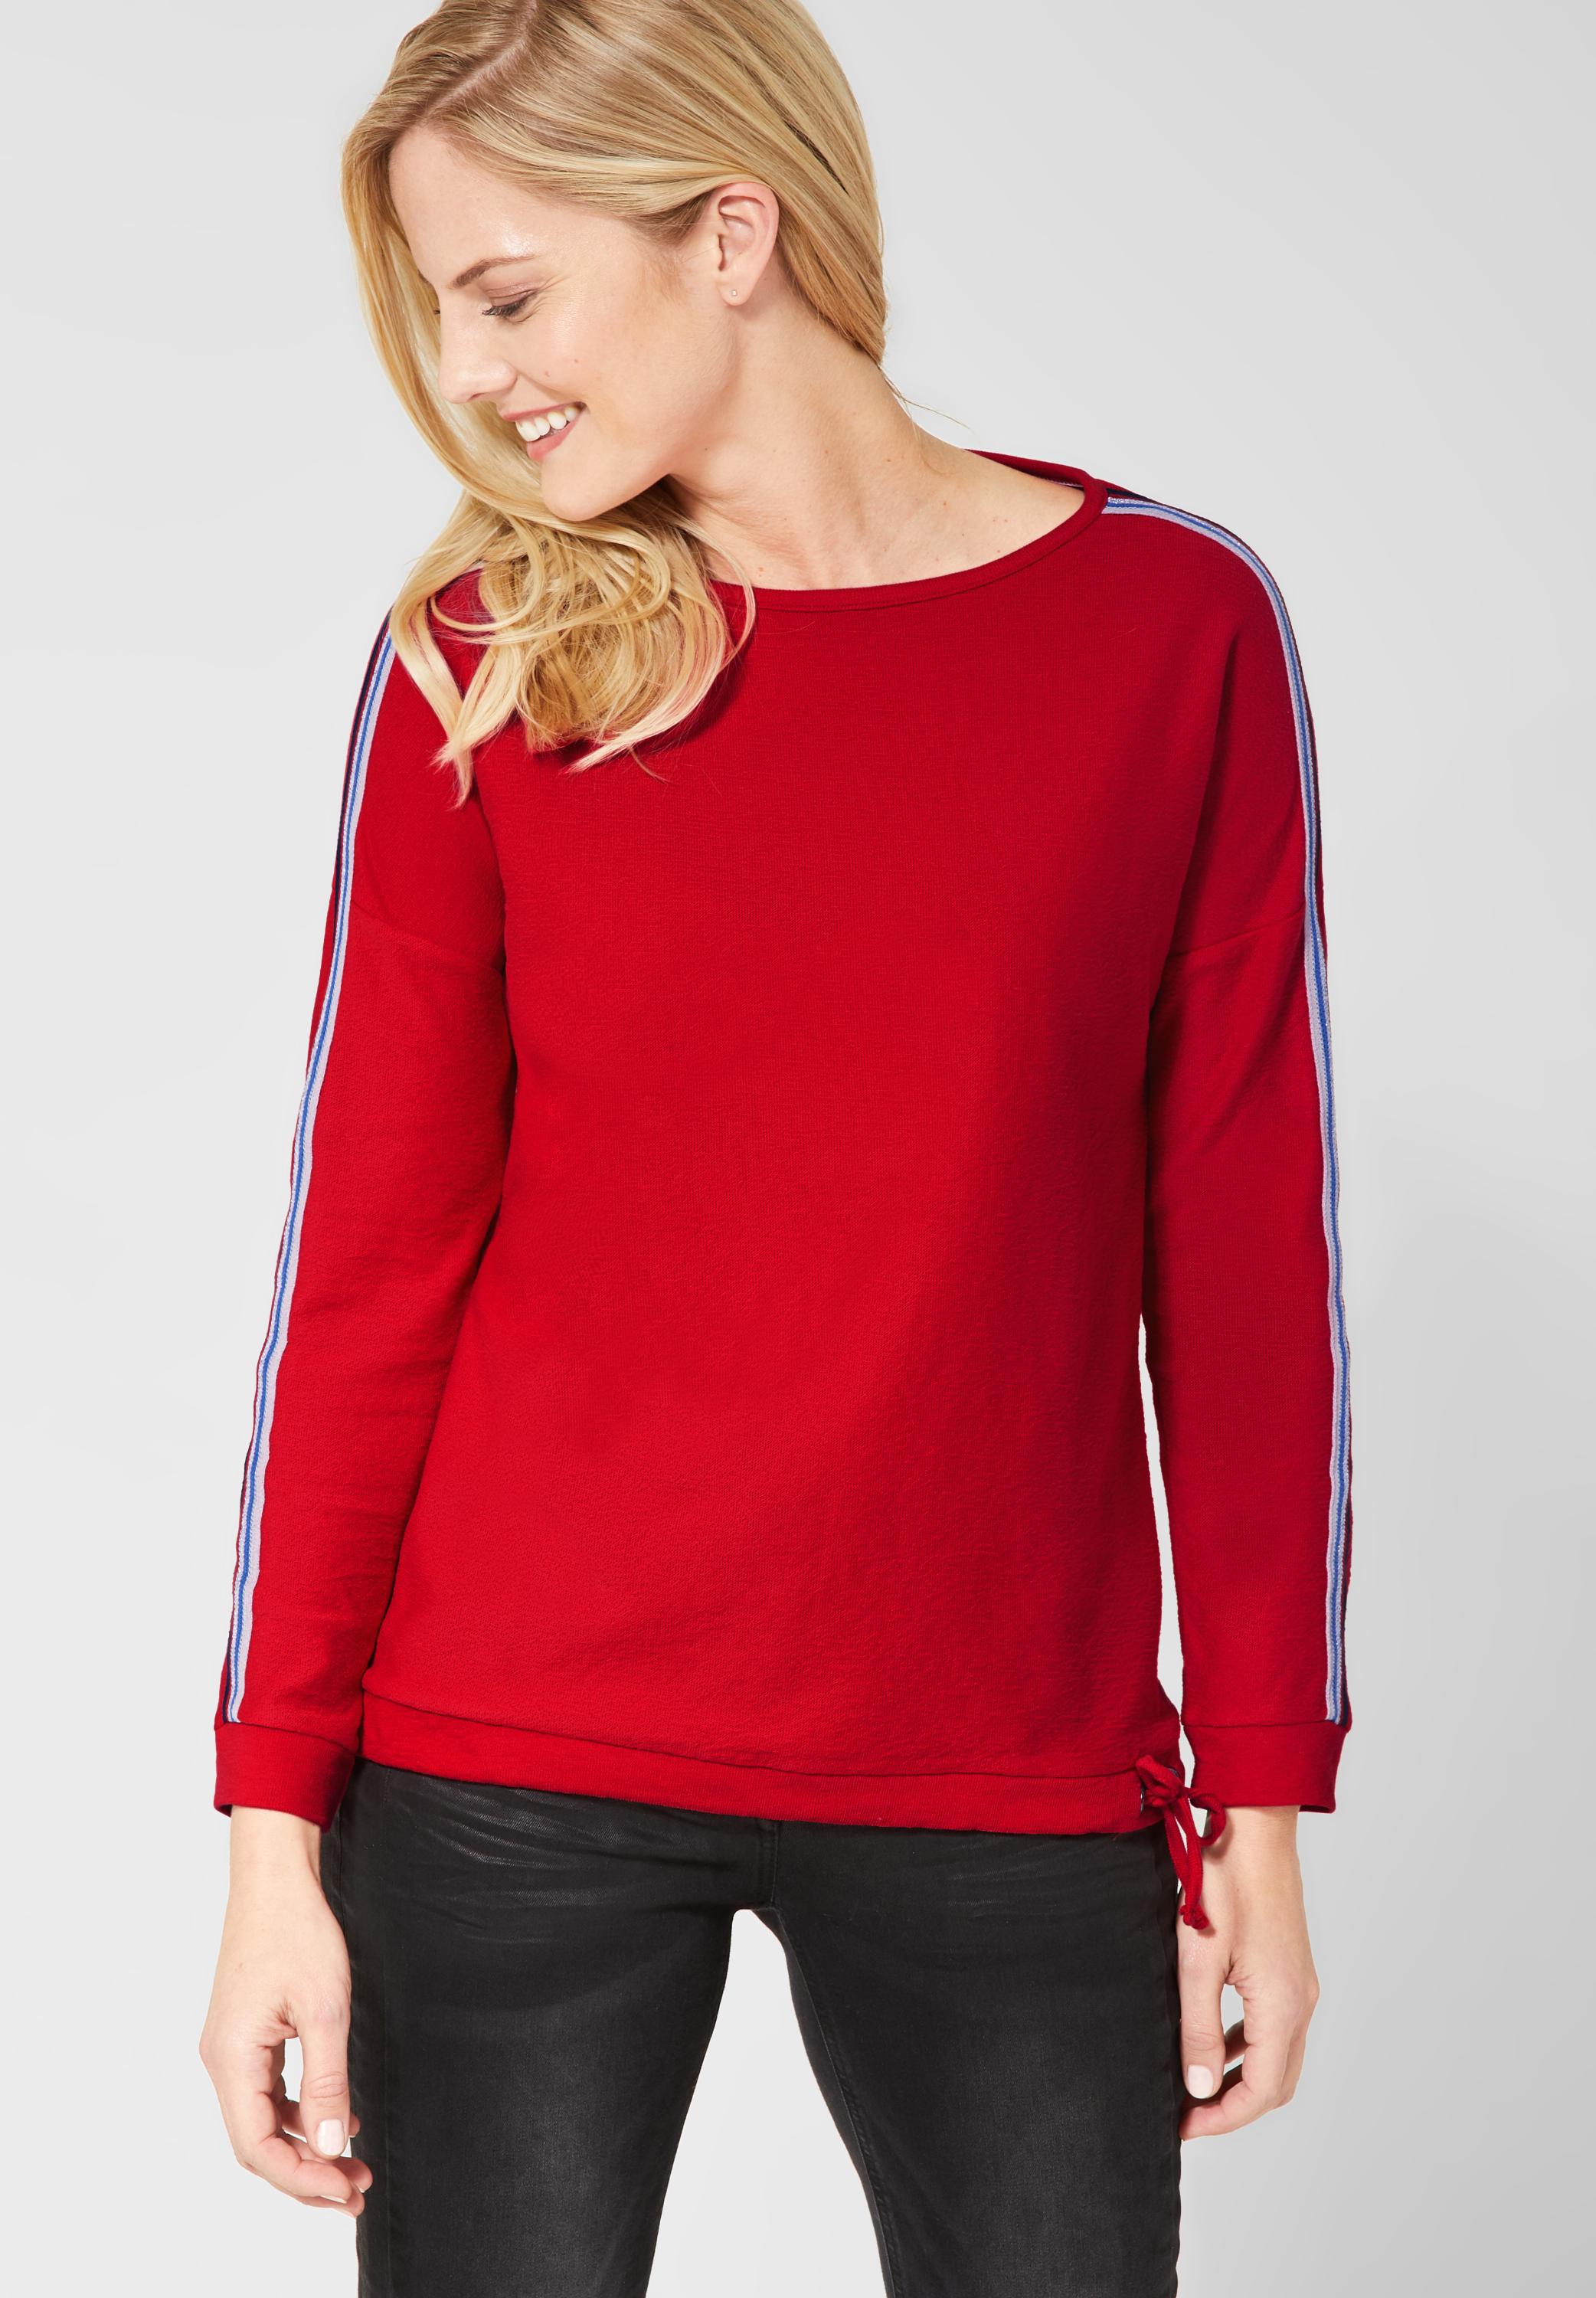 CECIL Langarmshirt in Tomato Red Mode - CONCEPT B314407-12014